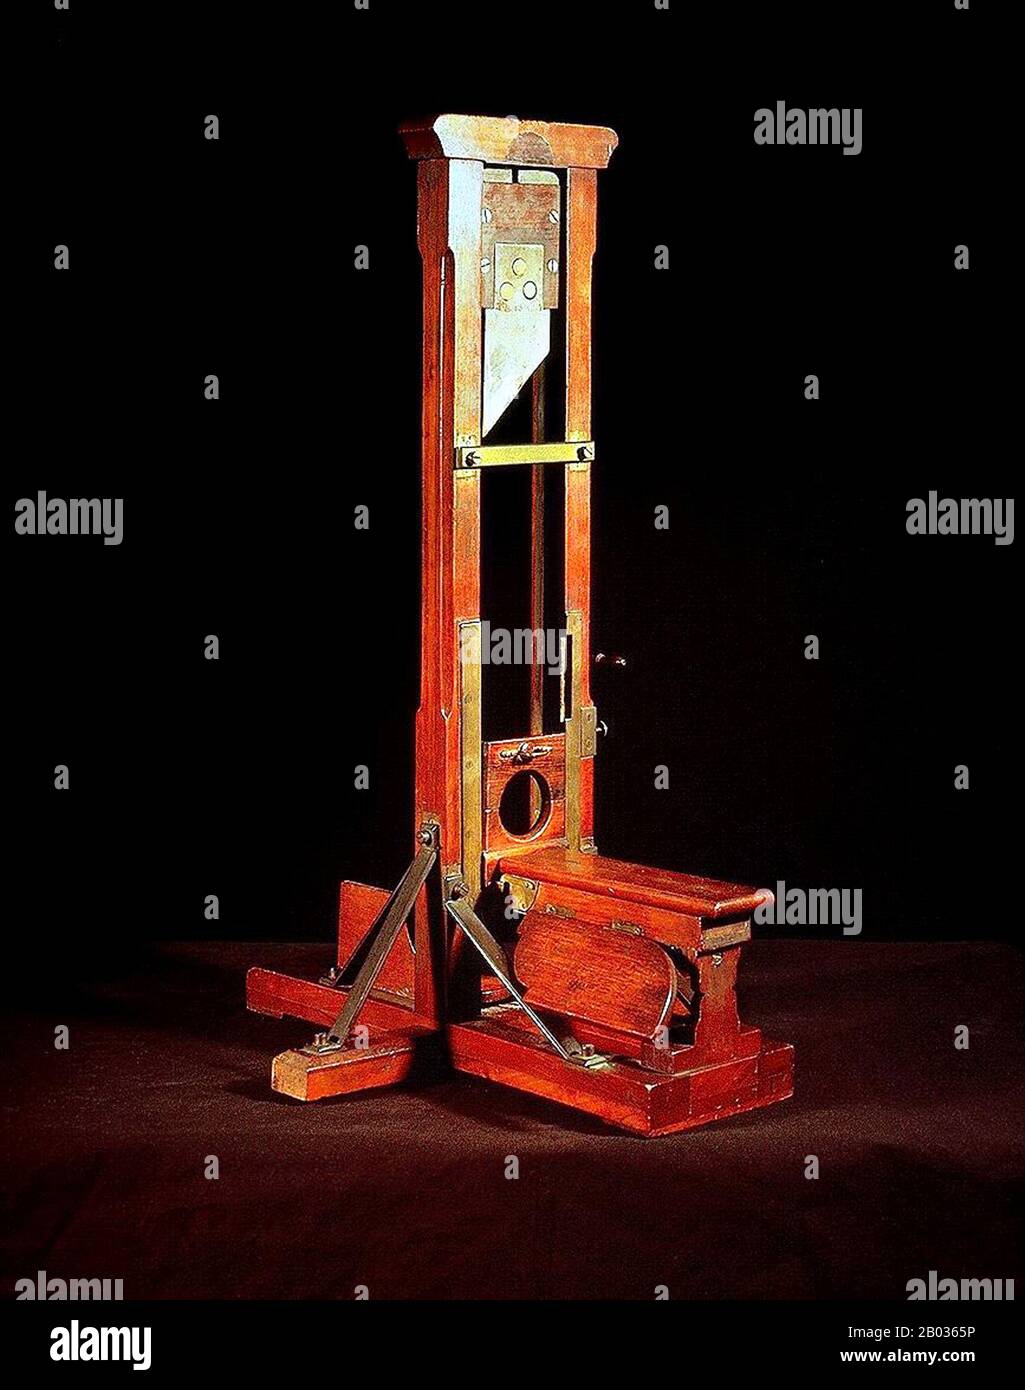 A guillotine is an apparatus designed for efficiently carrying out  executions by beheading. The device consists of a tall, upright frame in  which a weighted and angled blade is raised to the